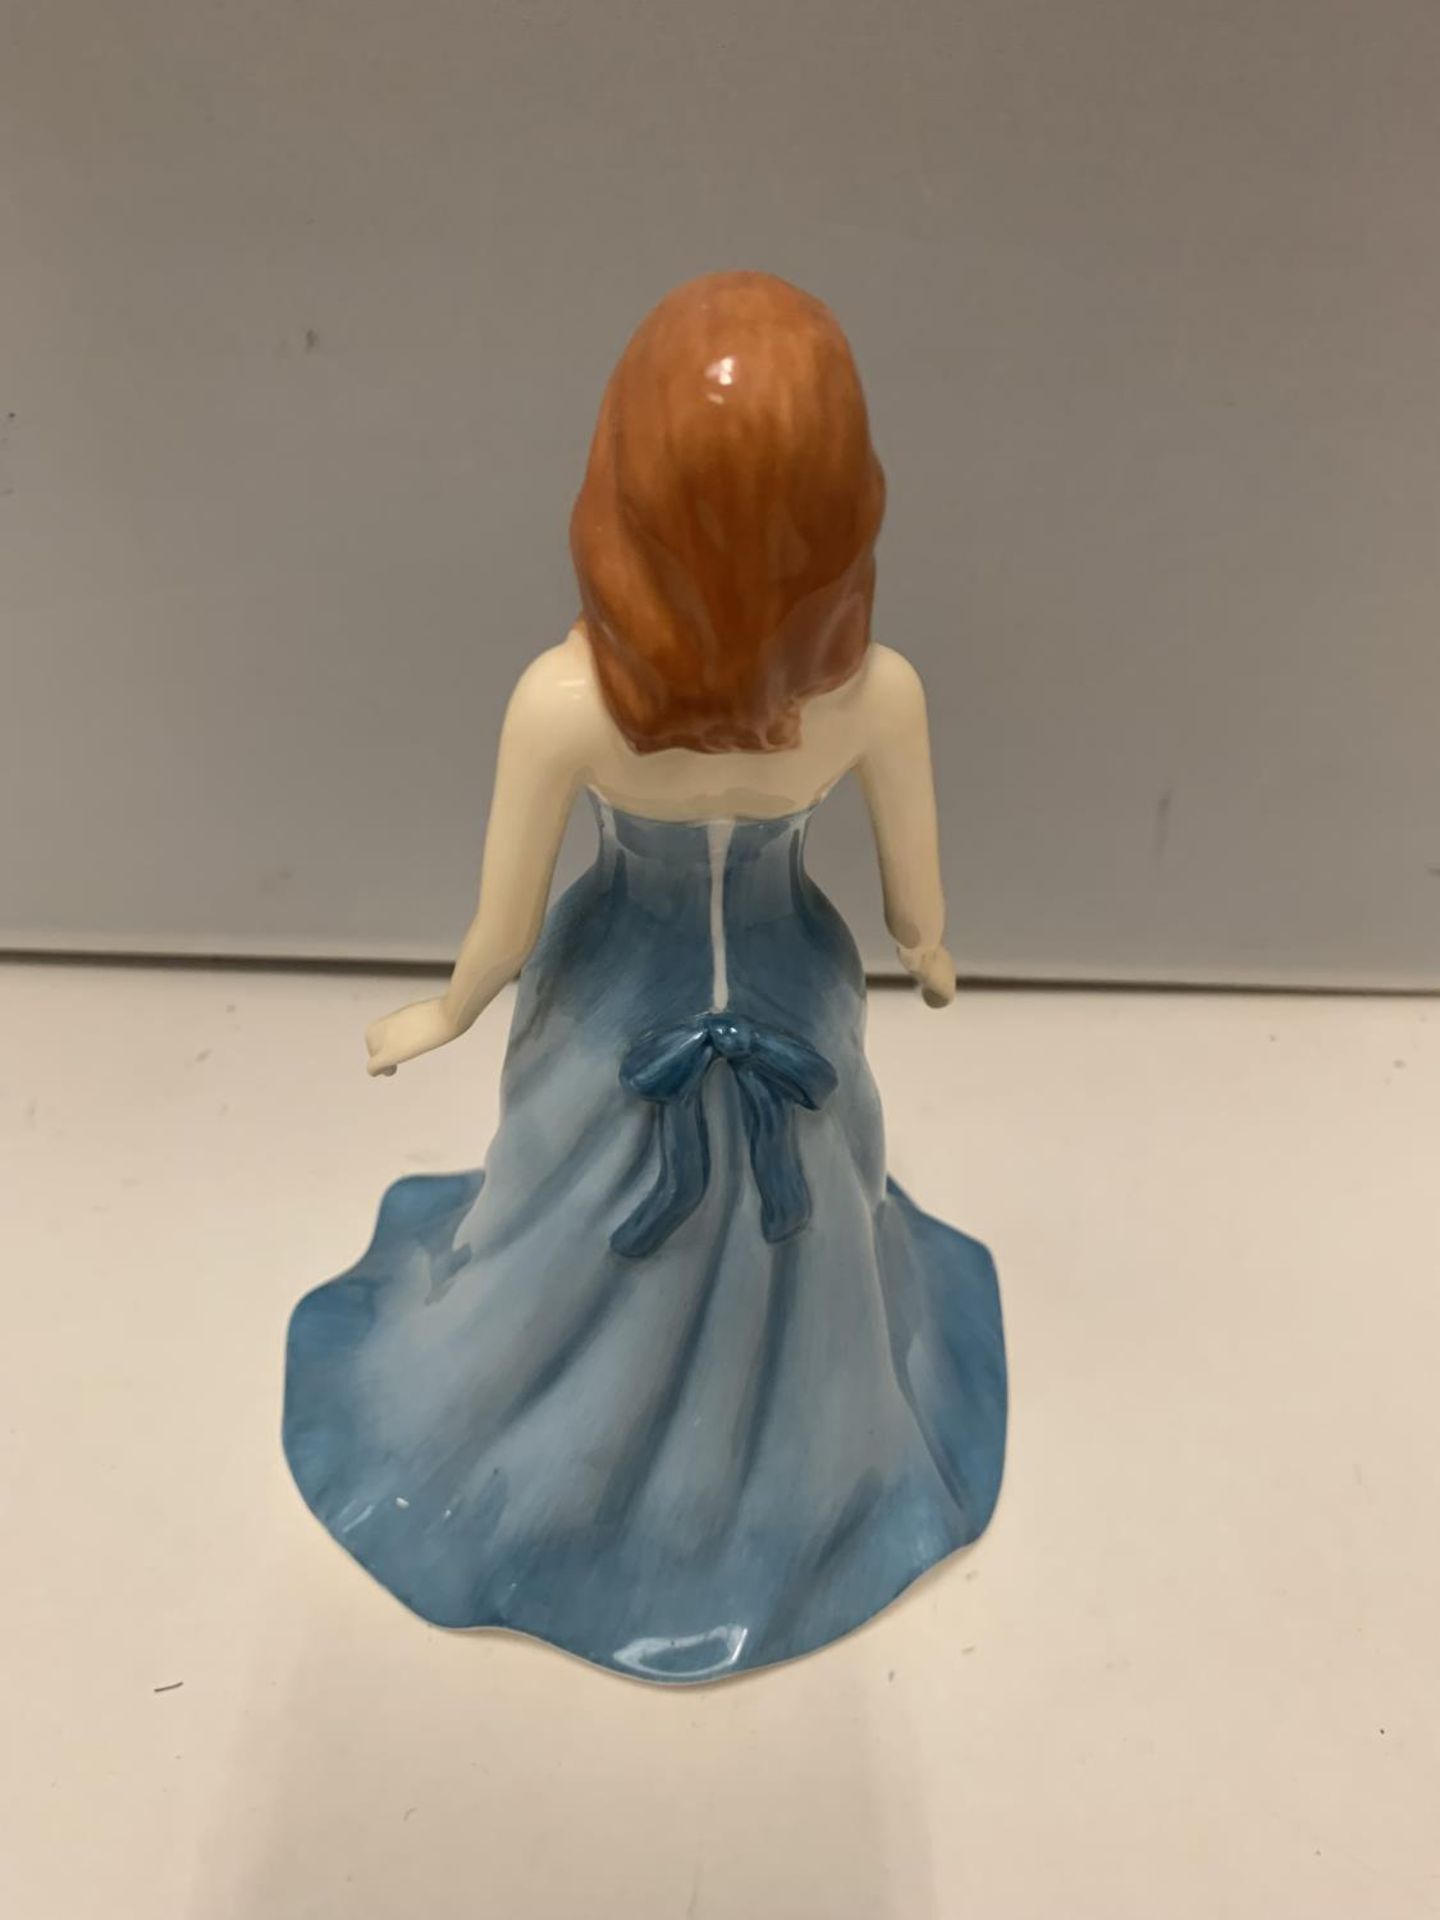 A ROYAL DOULTON GEMSTONES FIGURINE WITH A GENUINE SWAROVSKI CRYSTAL - DECEMBER - TURQUOISE (NO BOX) - Image 2 of 3